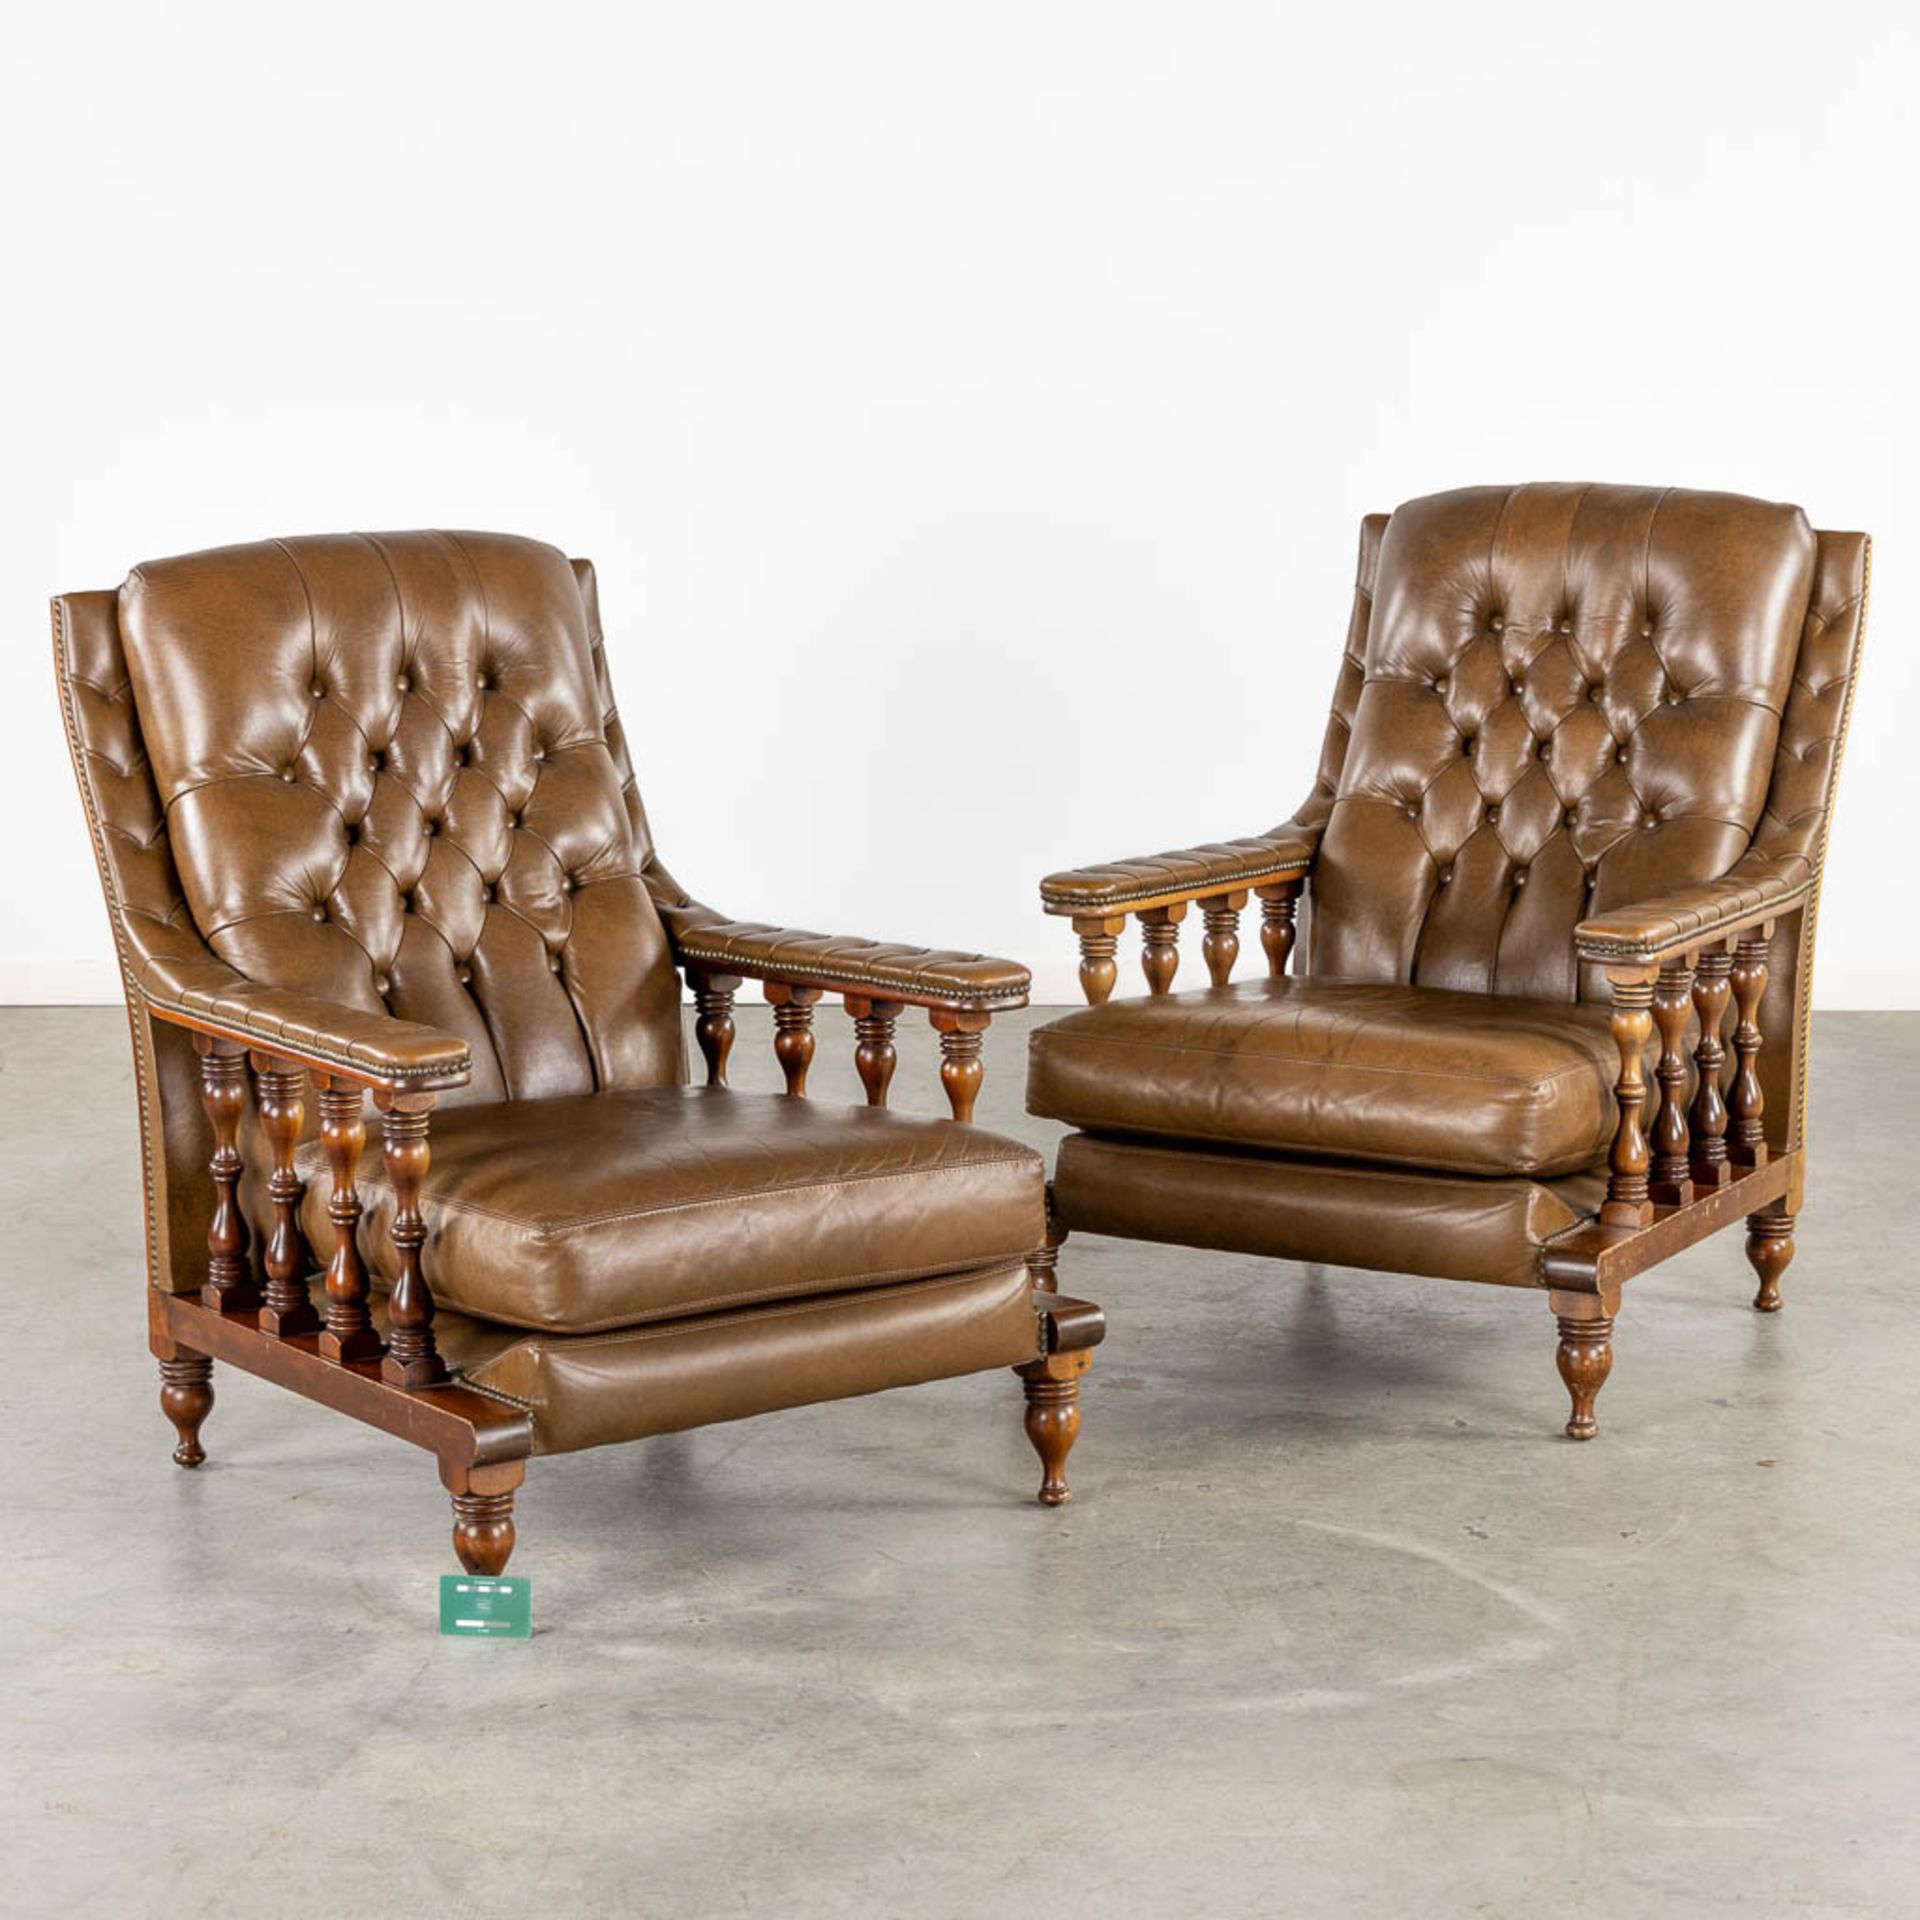 A pair of relax chairs, leather and wood in Chesterfield style. (L:83 x W:74 x H:95 cm) - Bild 2 aus 11